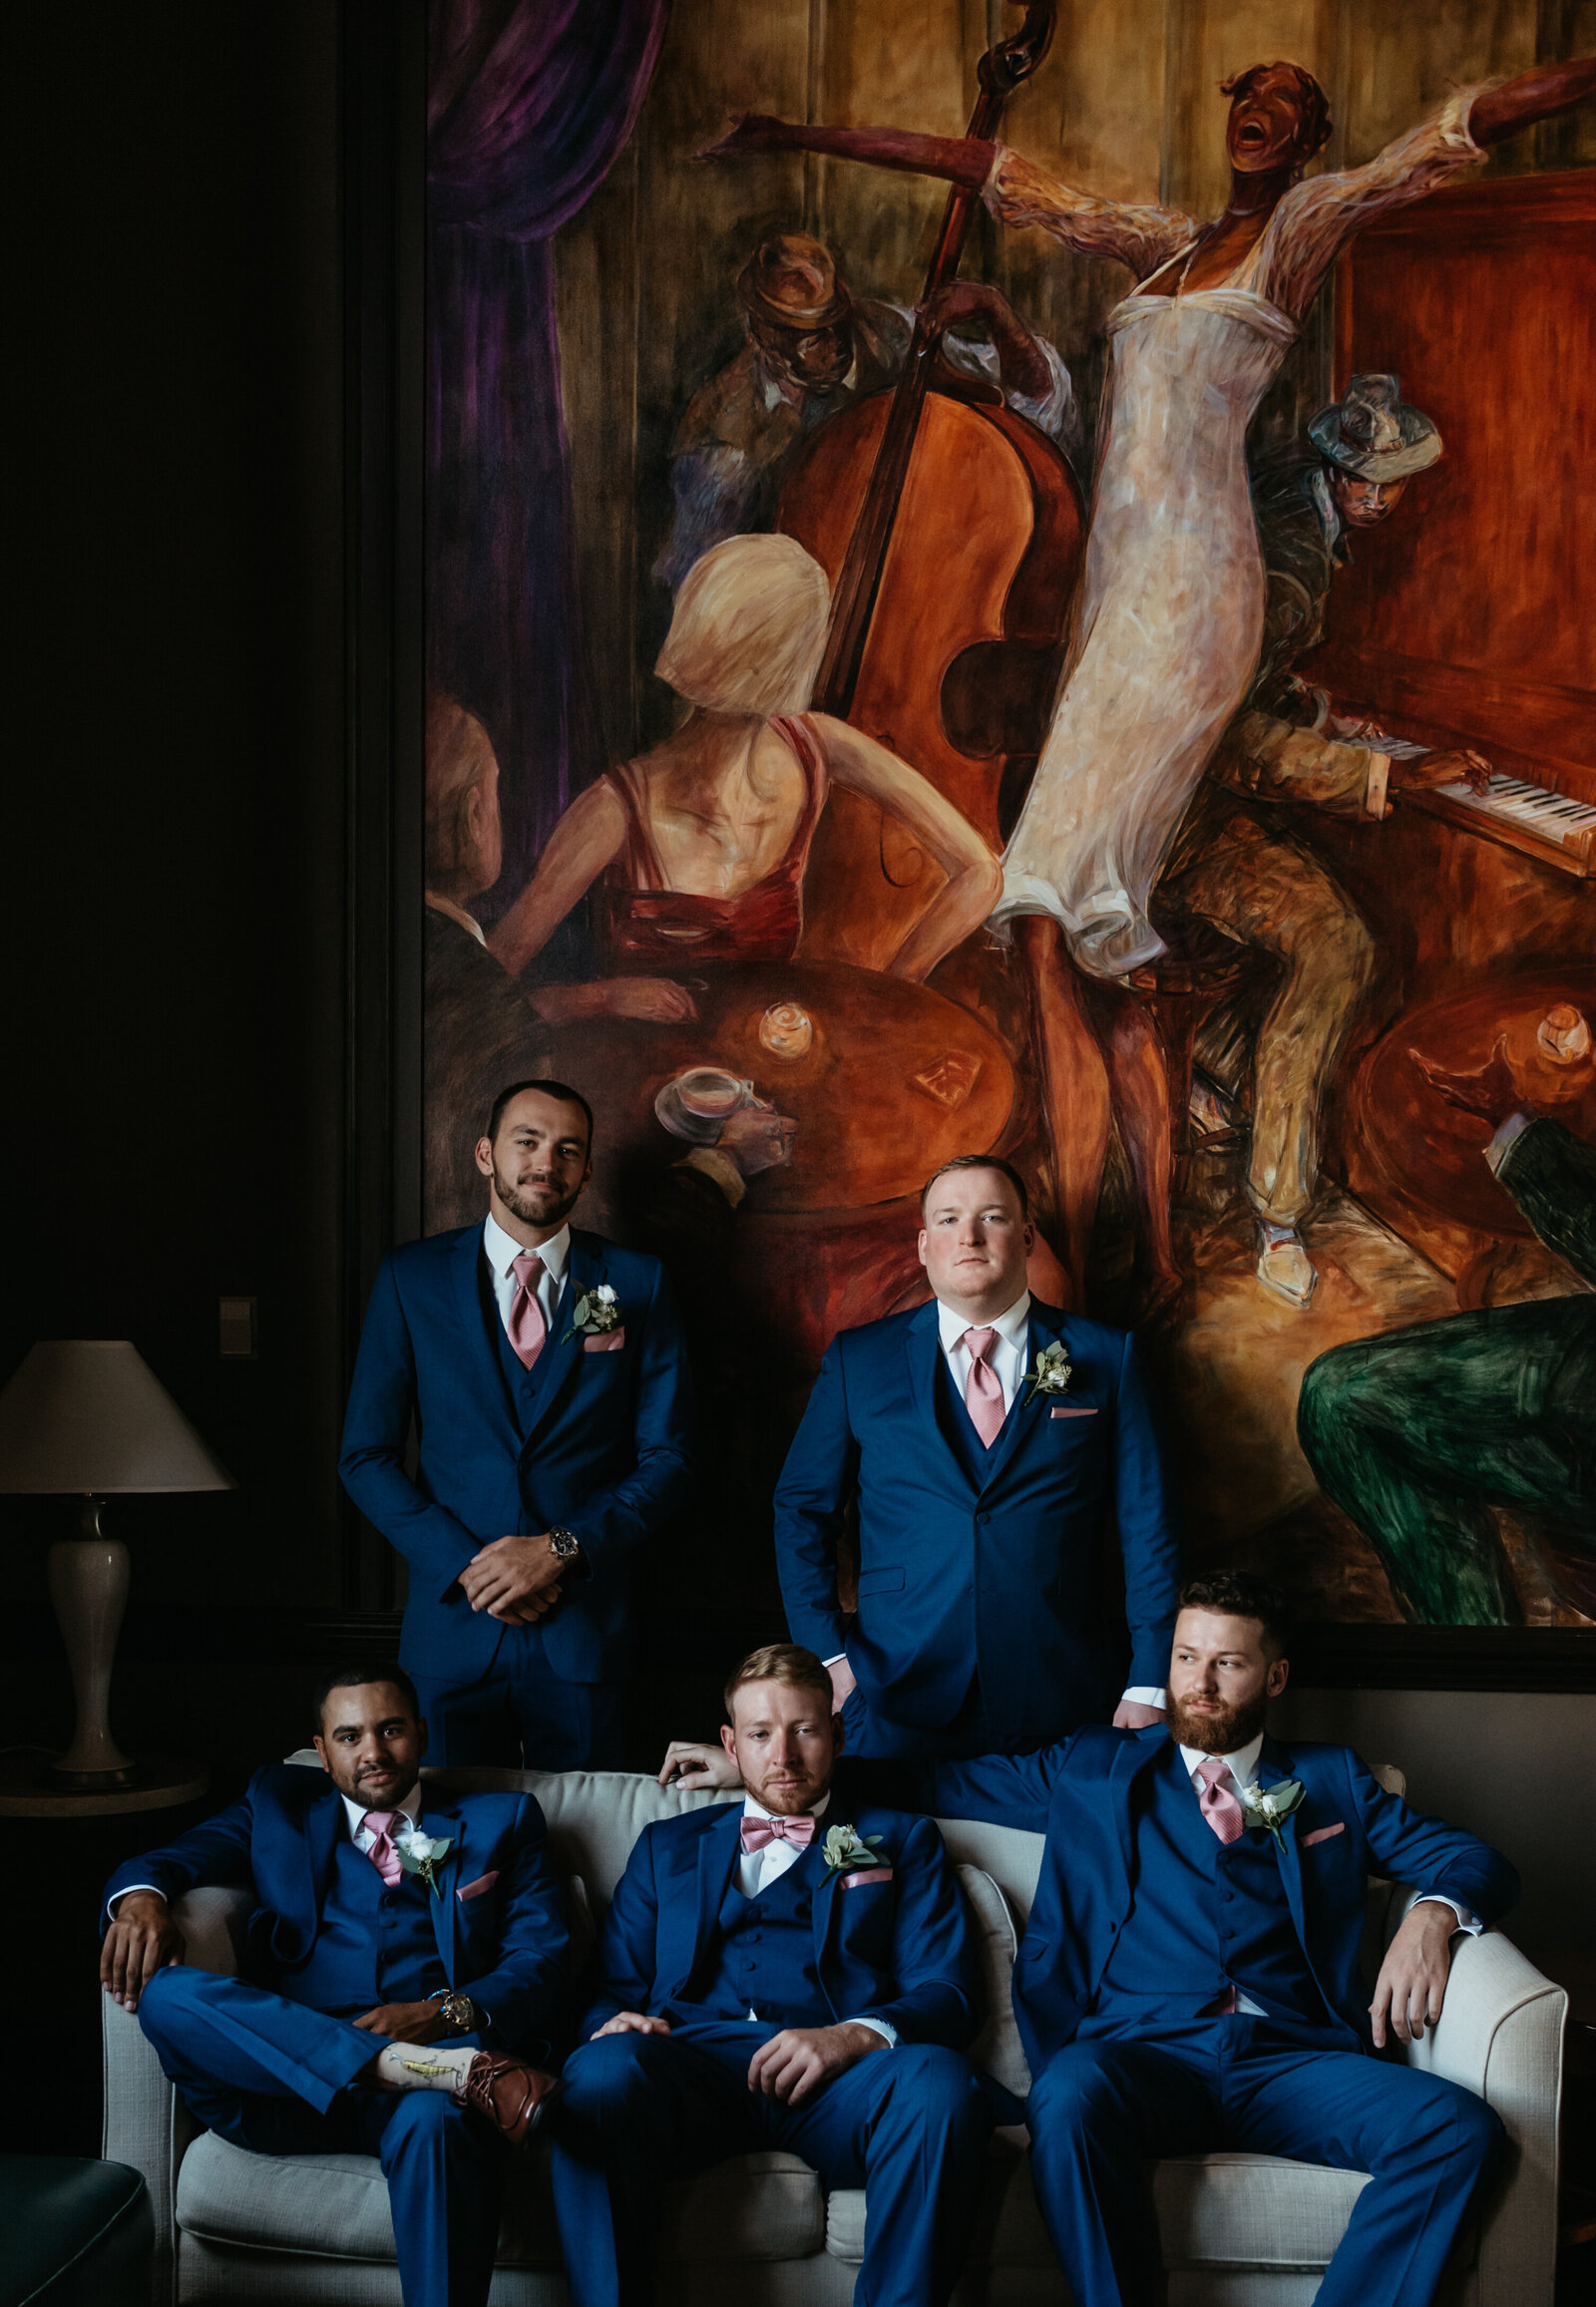 A groom and his groomsmen sit on a couch in front of a large painting